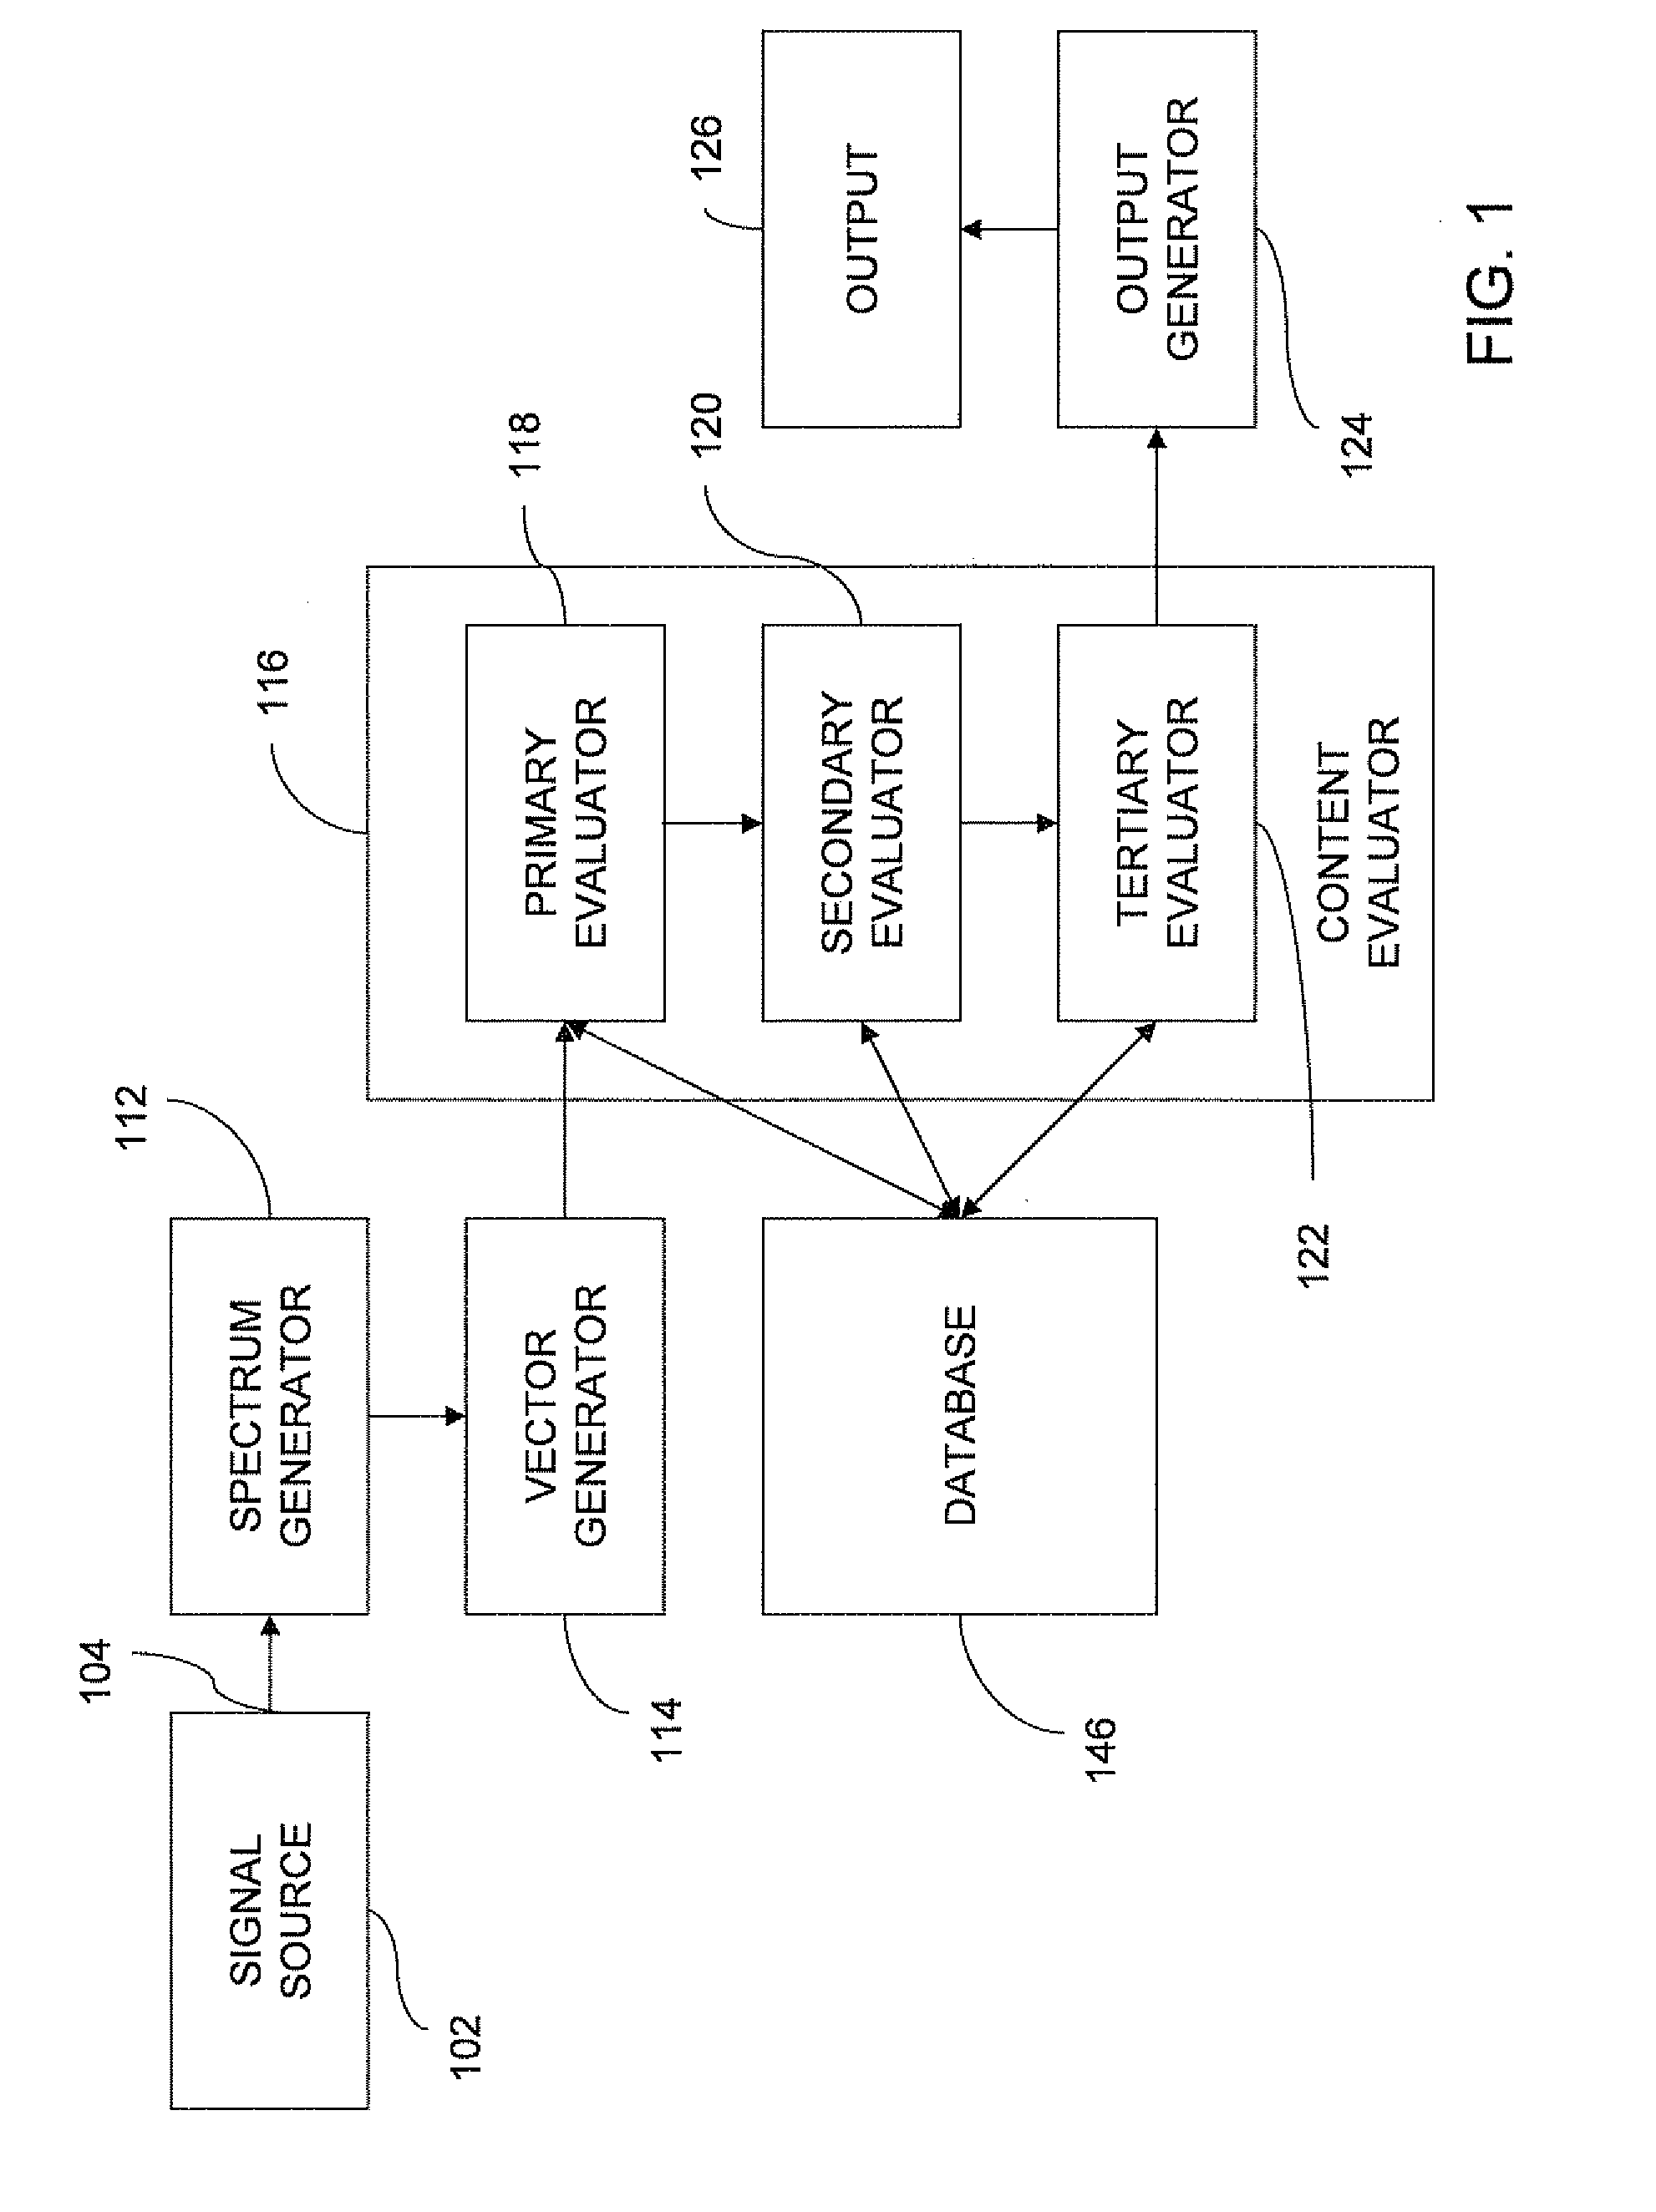 System and Method for Media Recognition